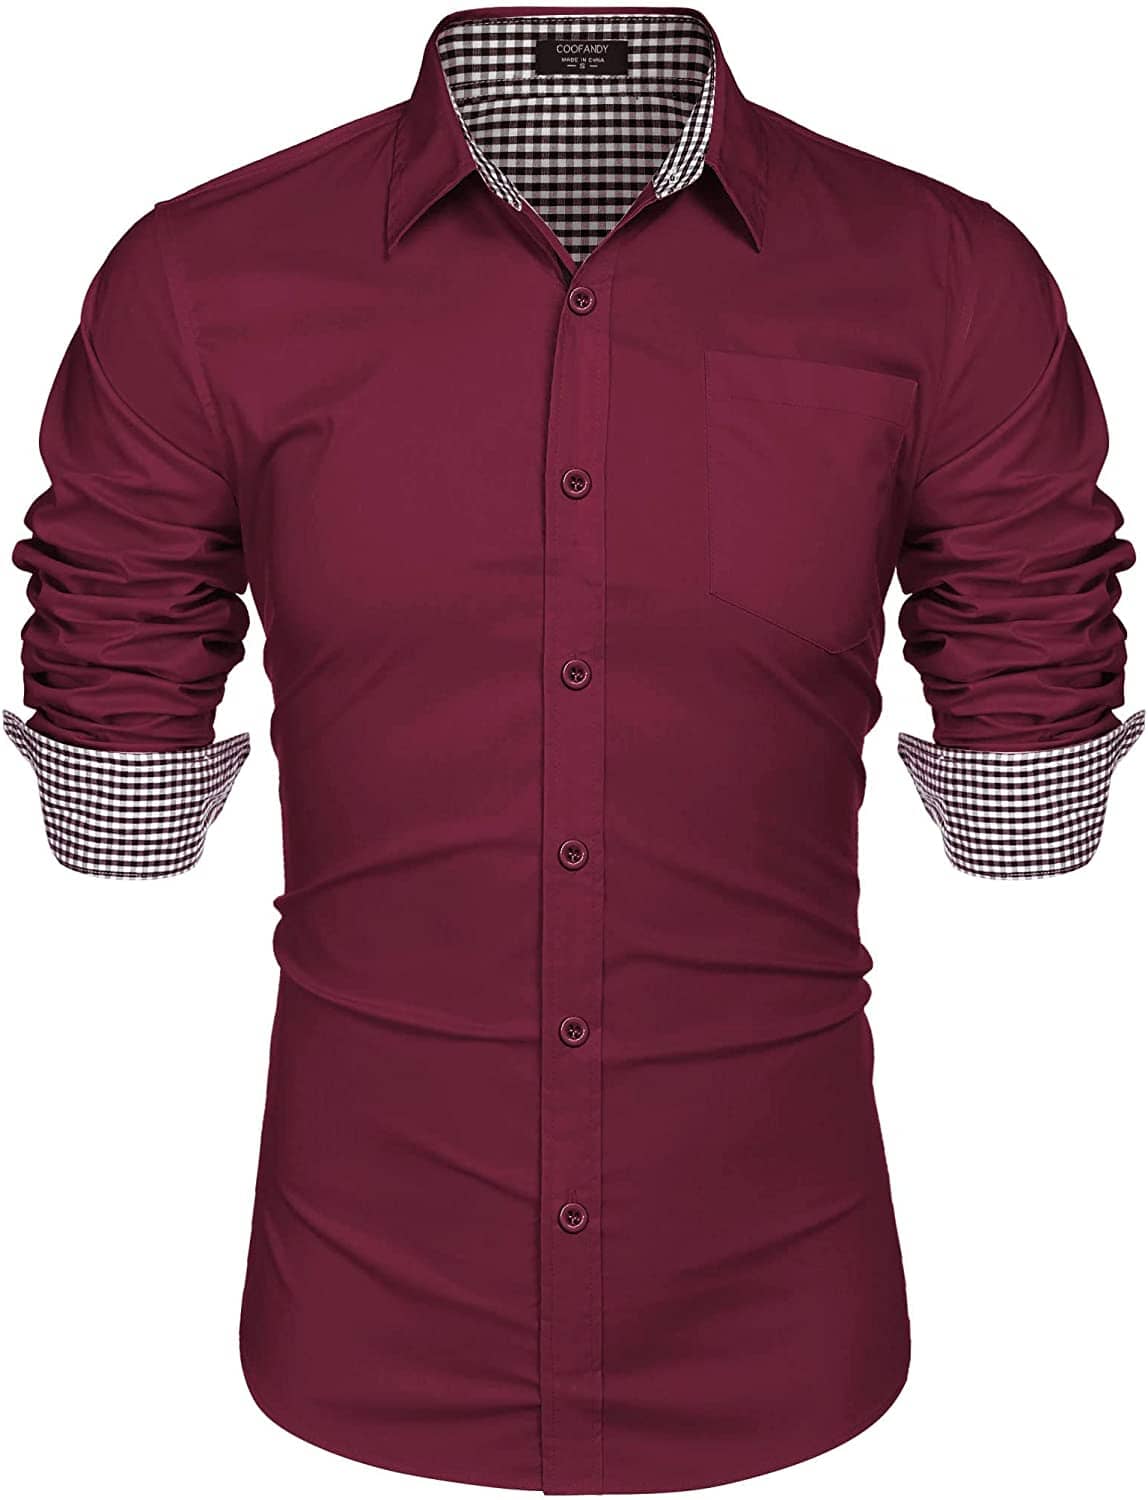 Fashion Business Cotton Dress Shirt (US Only) Shirts COOFANDY Store Wine Red S 